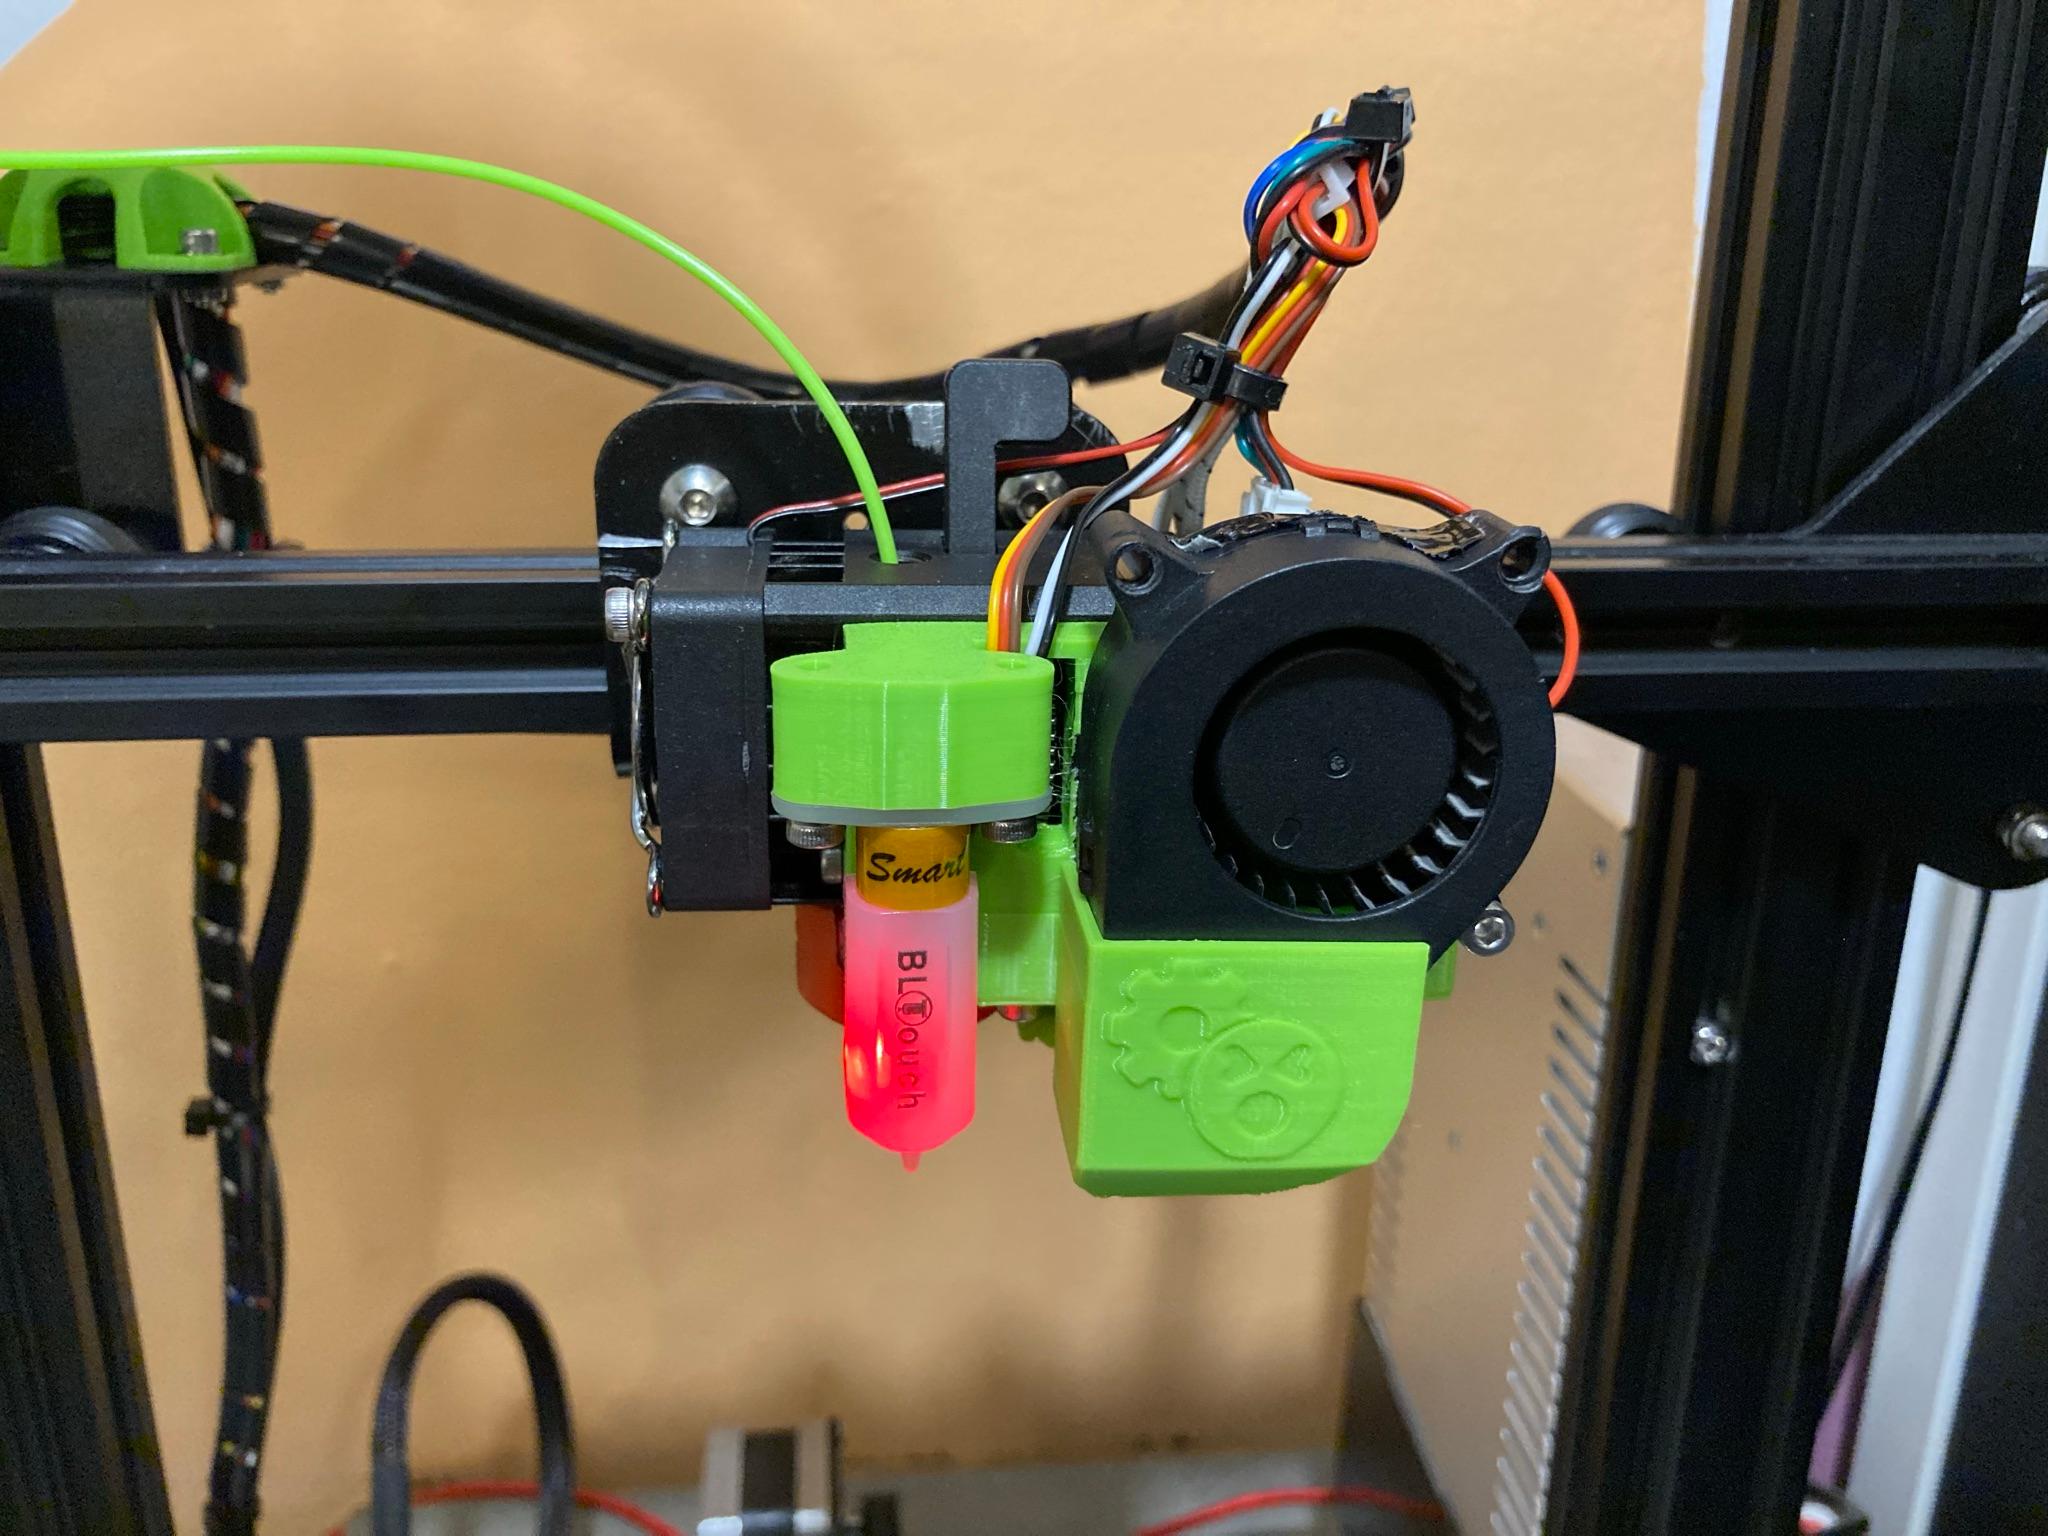 BLTouch and 4020 fan mount for the BIQU H2 ectruder - Front view, mounted to an Ender 3  - 3d model